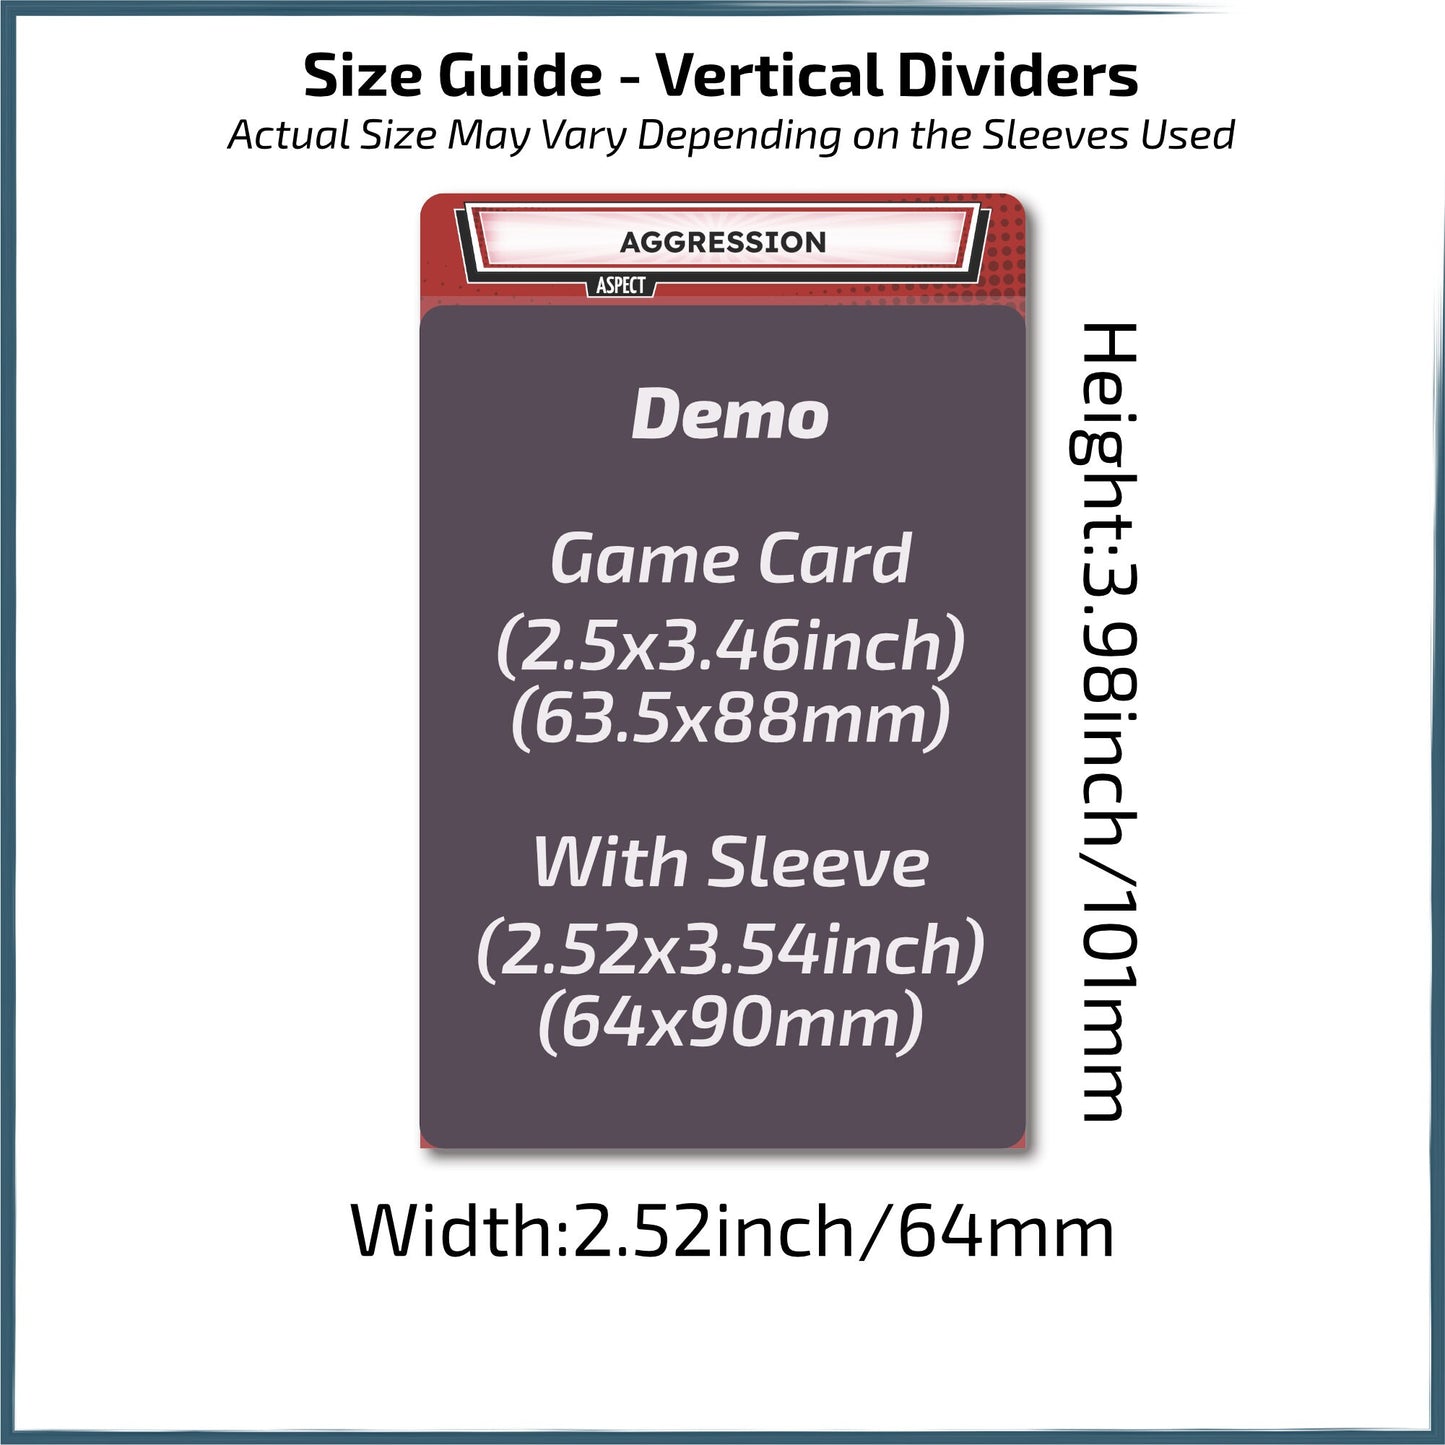 Size Guide for Vertical Dividers